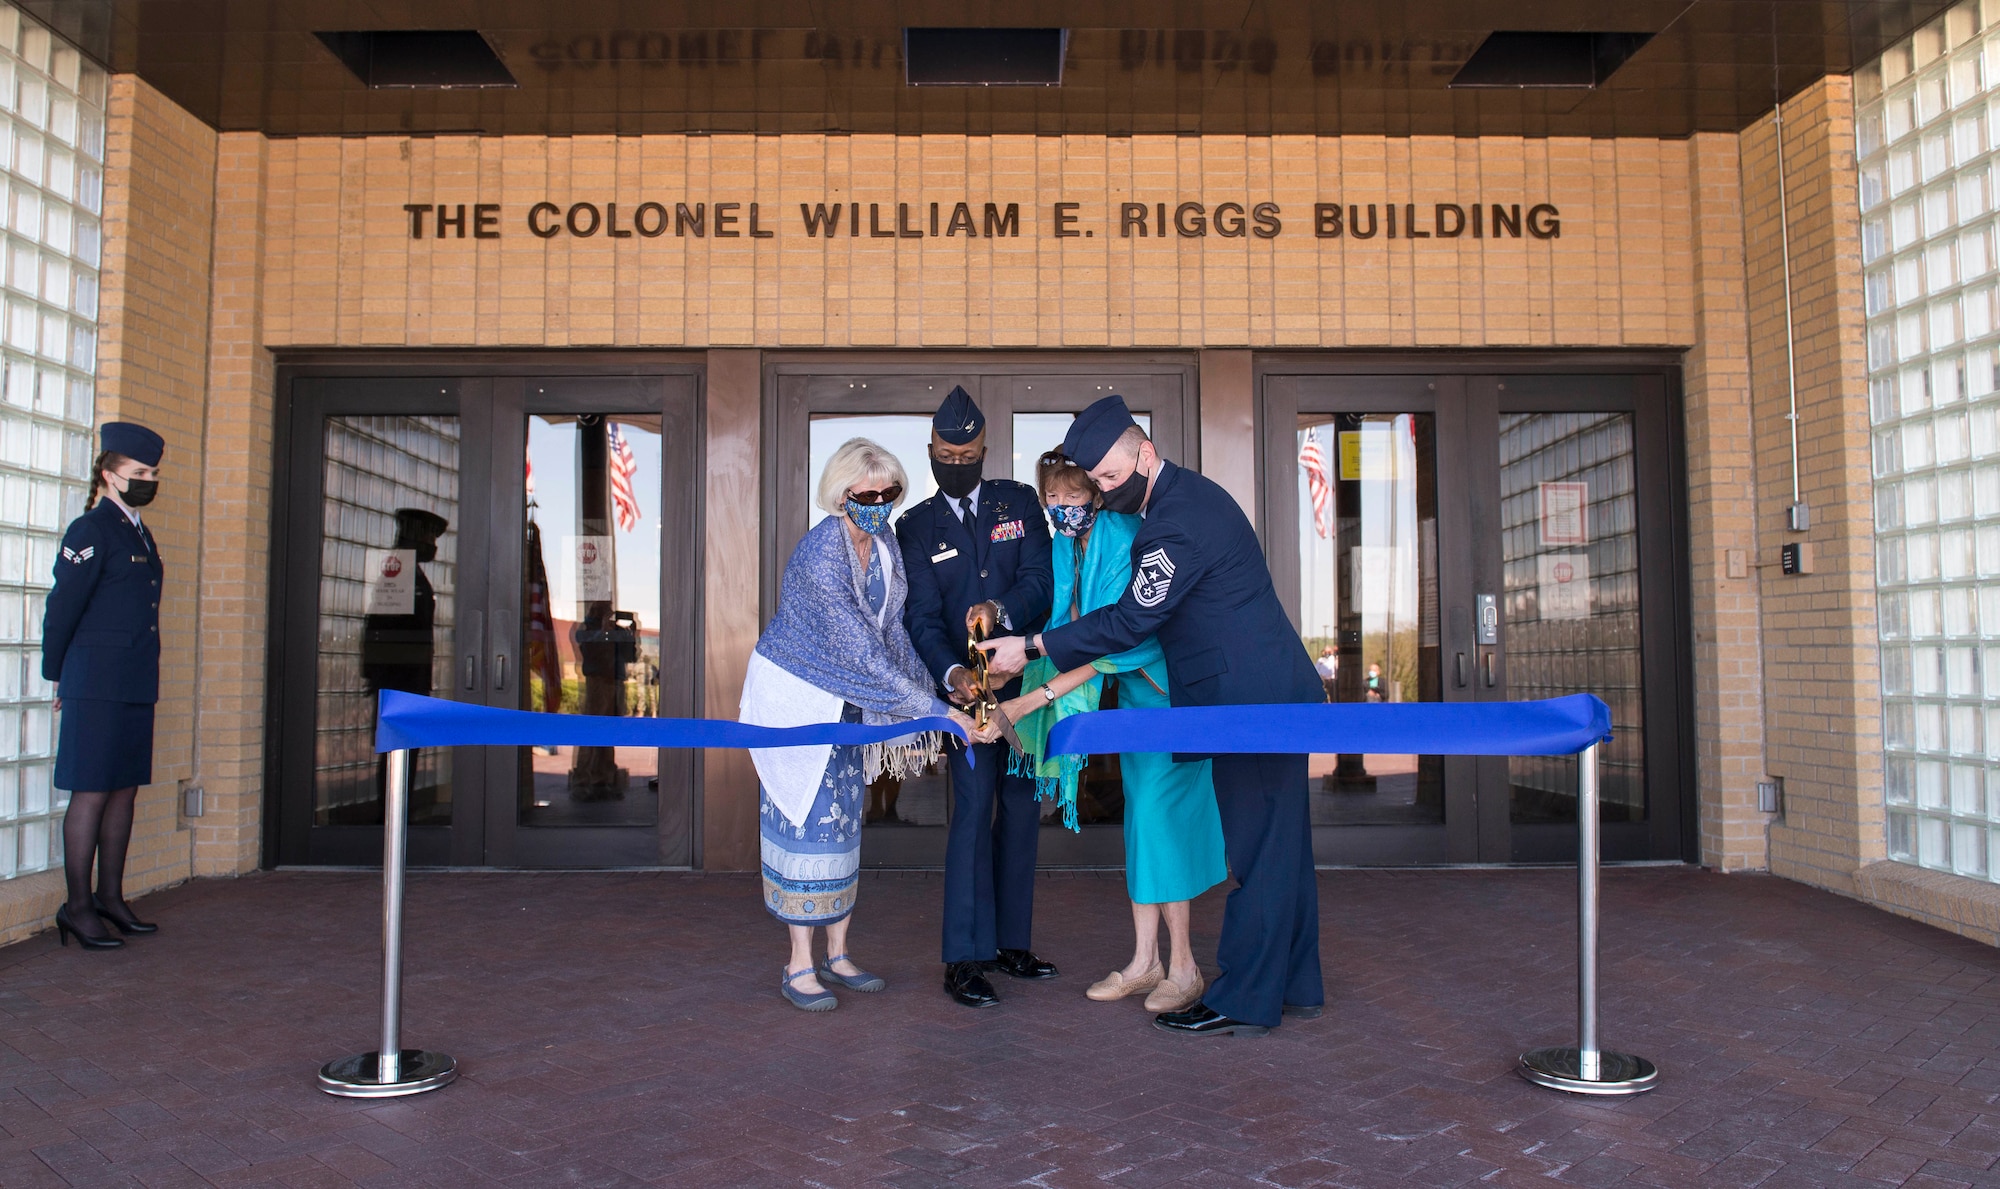 Two women and two uniformed men cut a ribbon in front of a building.